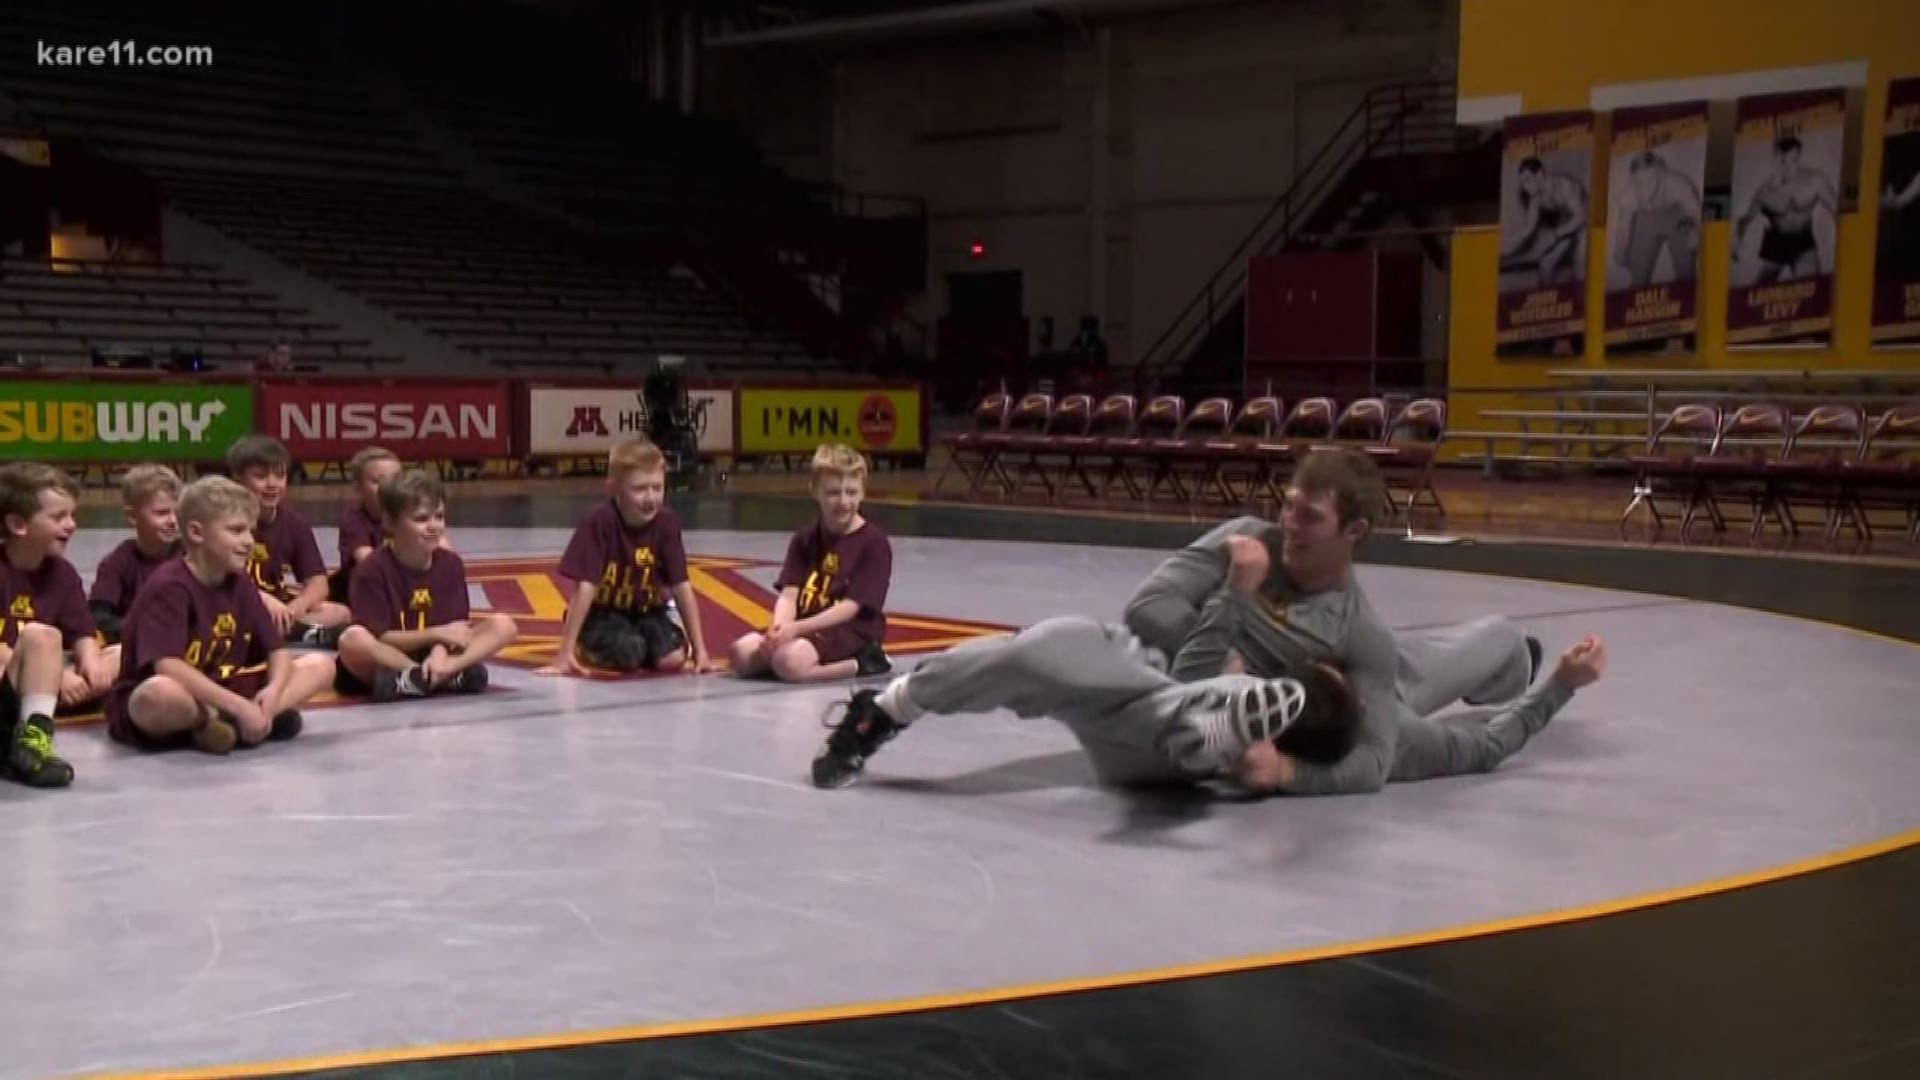 There's not a lot of down time for members of the Gopher wrestling team